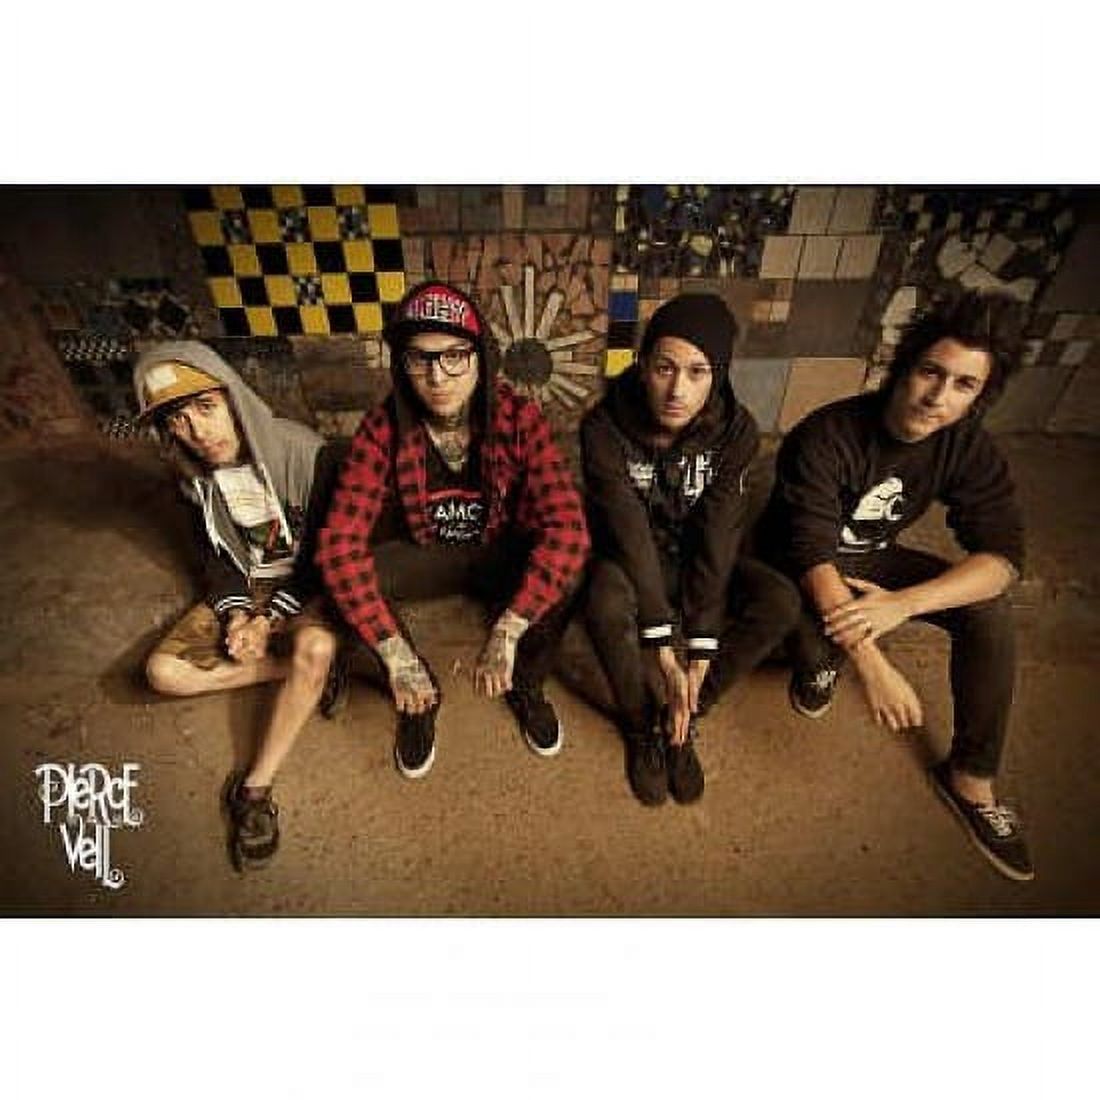 Pierce The Veil Sitting Group Sitting Laminated Poster (36 x 24) - image 1 of 1